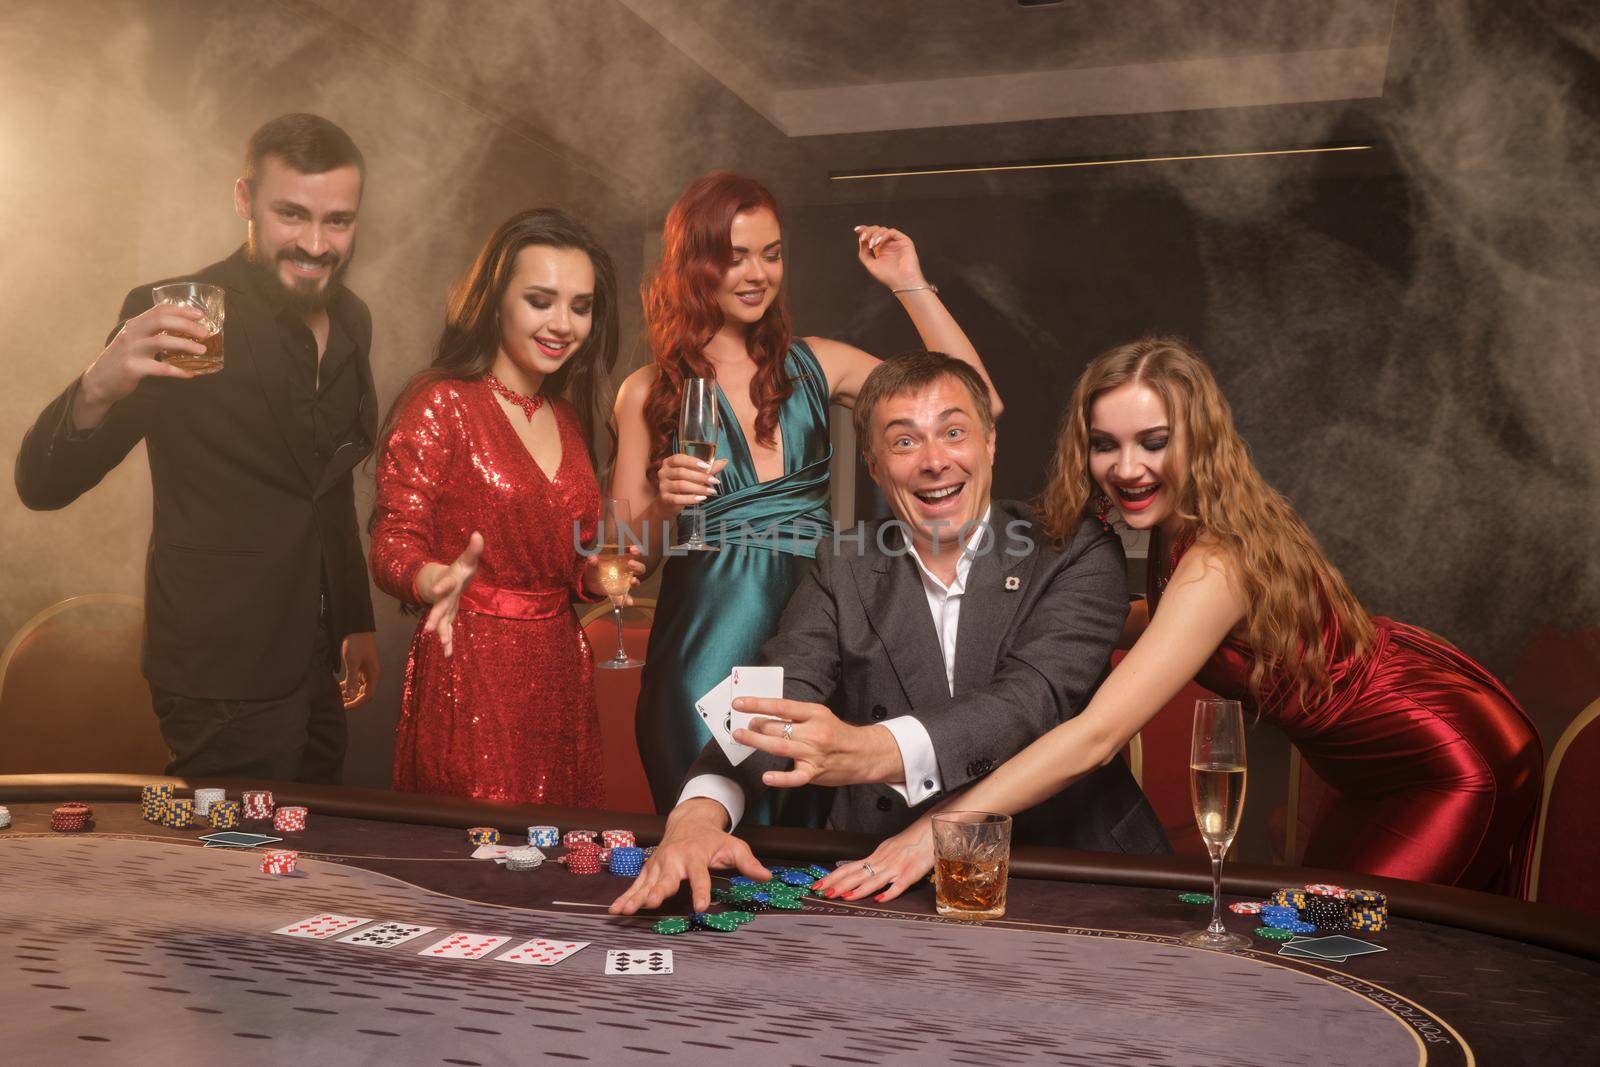 Enthusiastic buddies are playing poker at casino. They are celebrating their win, smiling and looking vey excited while posing at the table against a dark smoke background. Cards, chips, money, alcohol, gambling, entertainment concept.